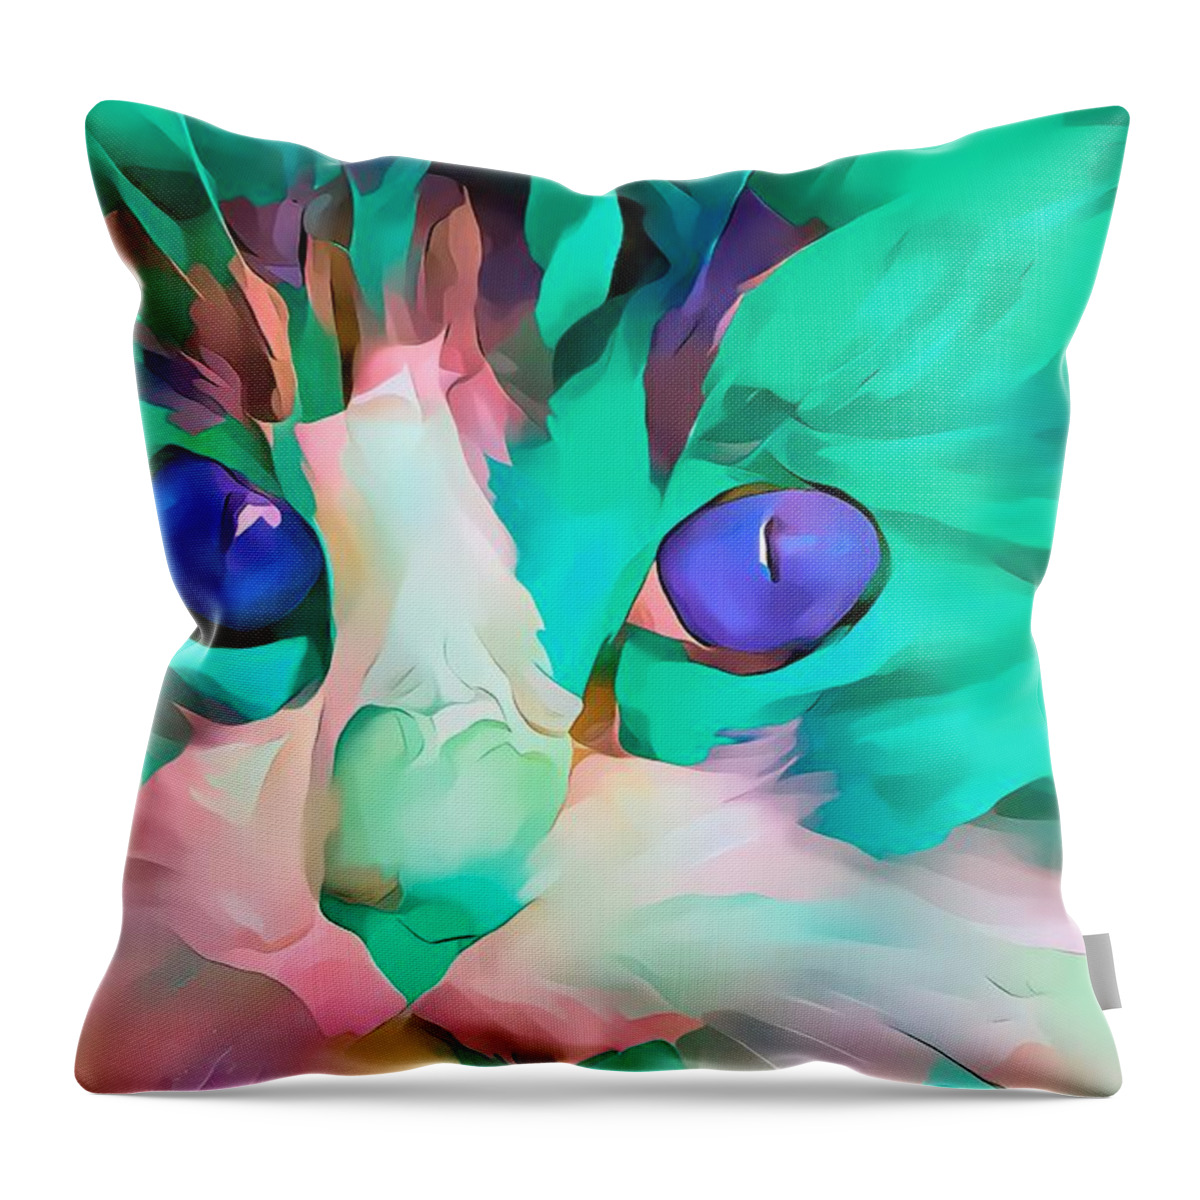 Glow Throw Pillow featuring the digital art Colorful Masters Green Glow Kitten by Don Northup